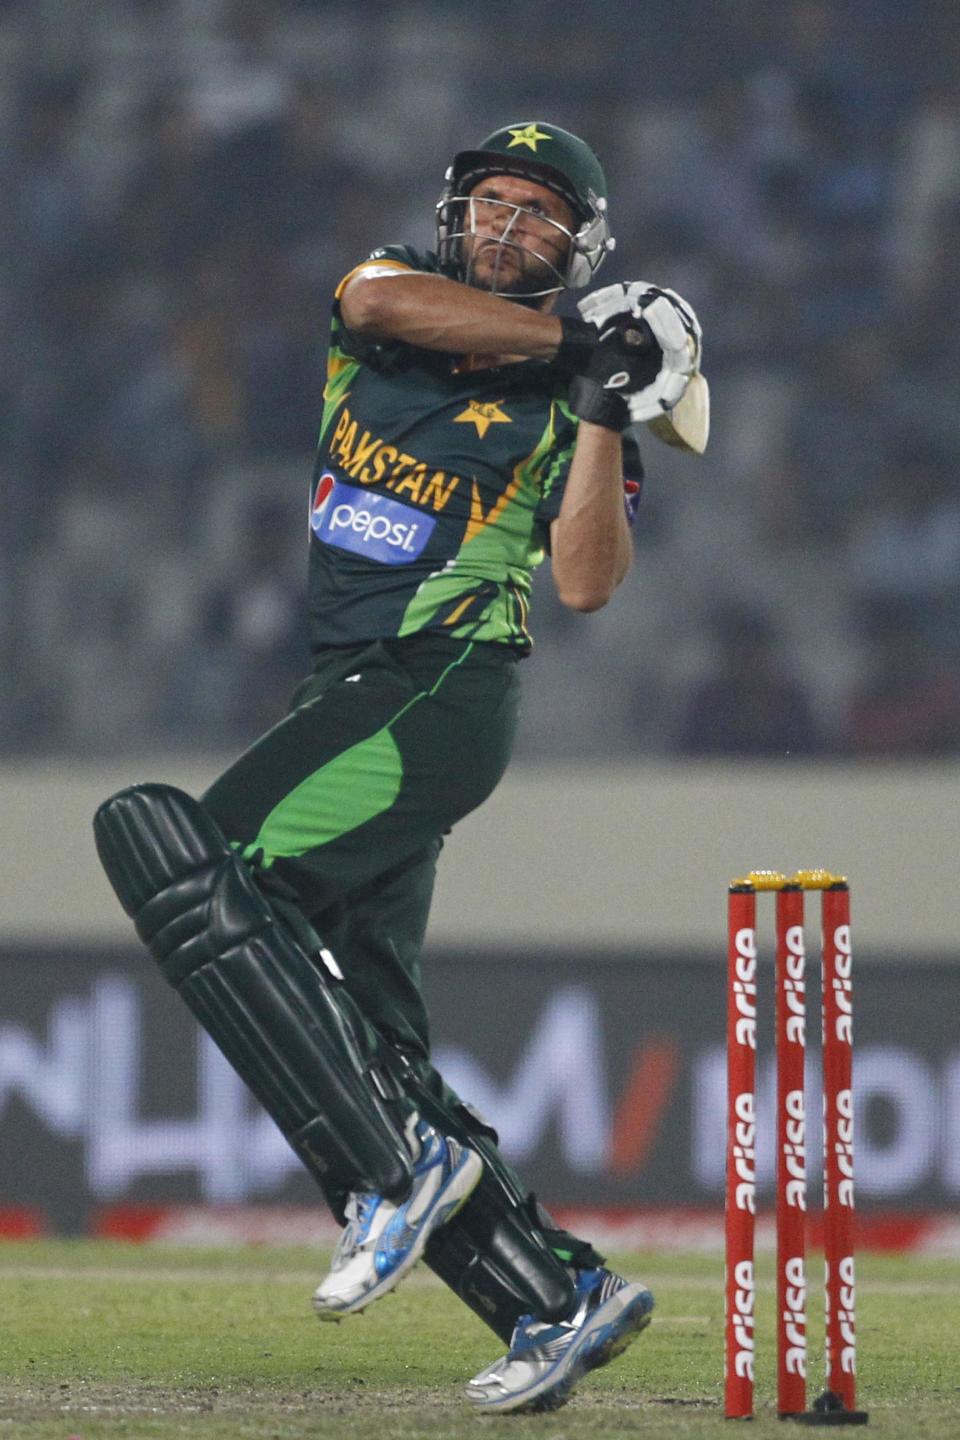 Pakistan’s Shahid Afridi, plays a shot during their match against Bangladesh in the Asia Cup one-day international cricket tournament in Dhaka, Bangladesh, Tuesday, March 4, 2014. (AP Photo/A.M. Ahad)